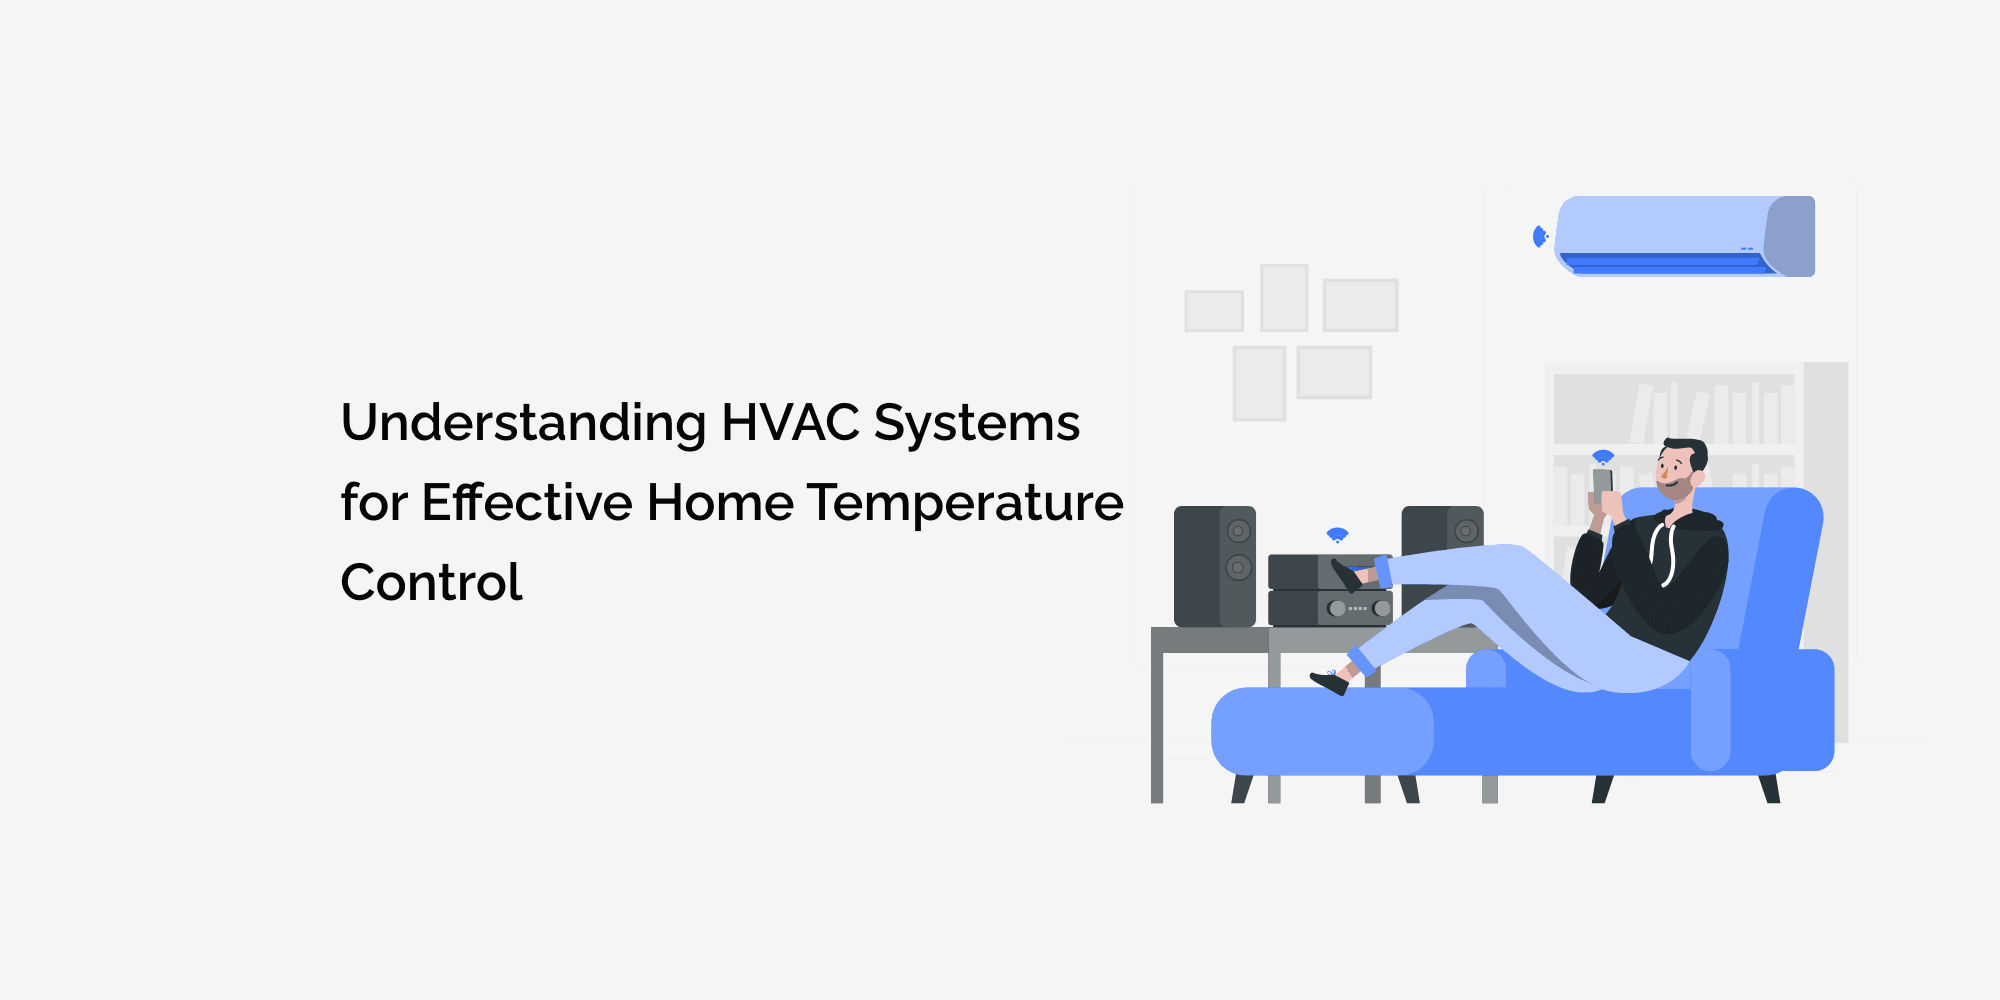 Understanding HVAC Systems for Effective Home Temperature Control